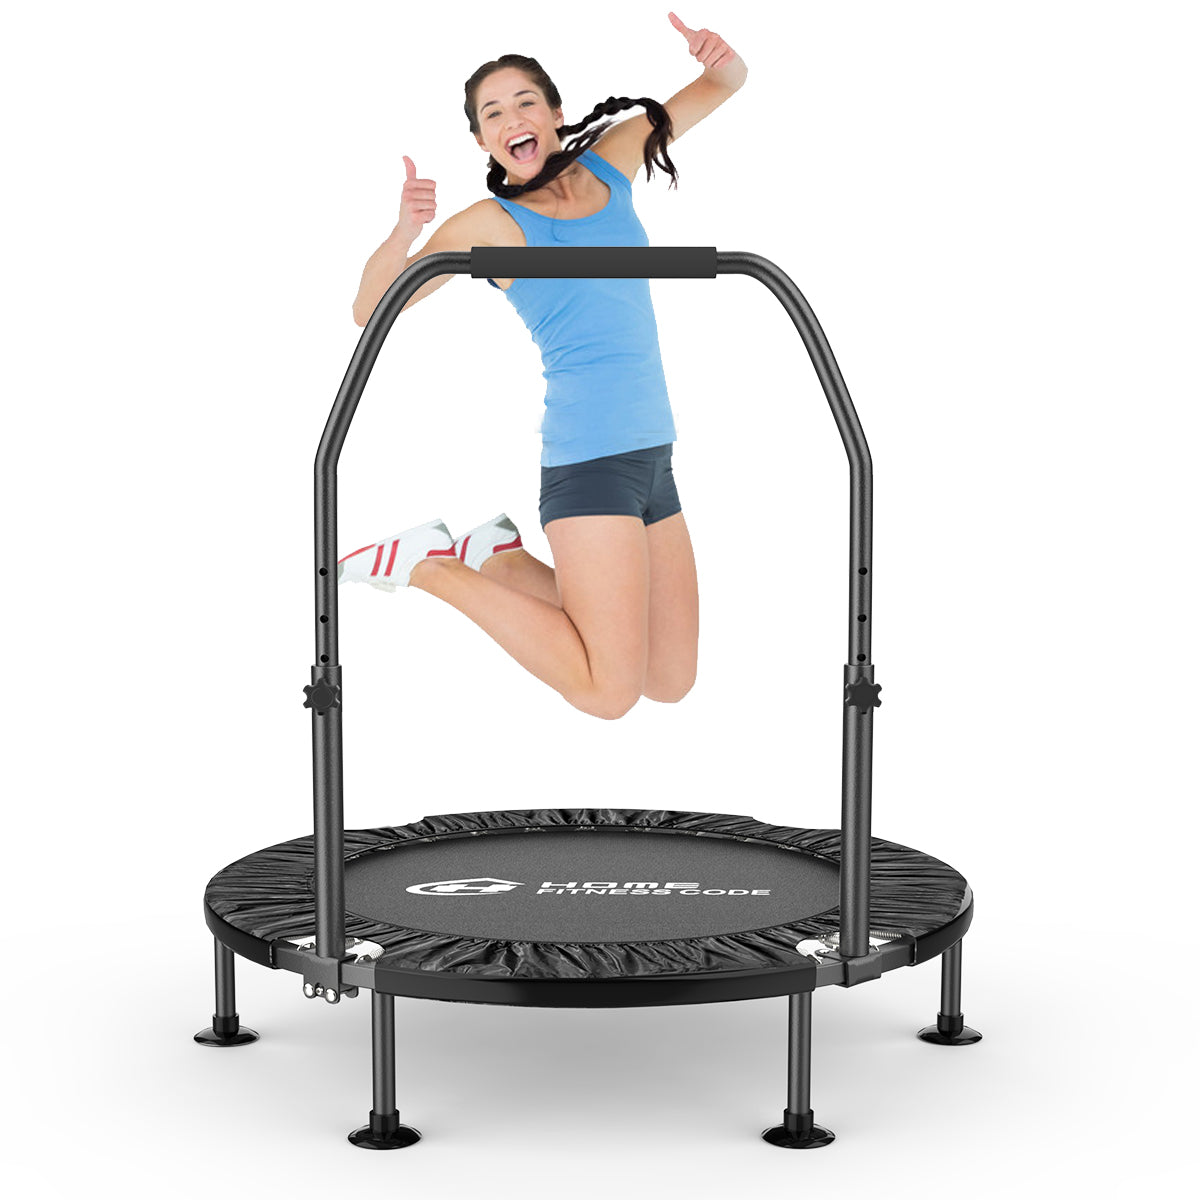 BCAN 40 Foldable Mini Trampoline, Fitness Rebounder with Adjustable Foam  Handle, Exercise Trampoline for Adults Indoor/Garden Workout Max Load  330lbs 